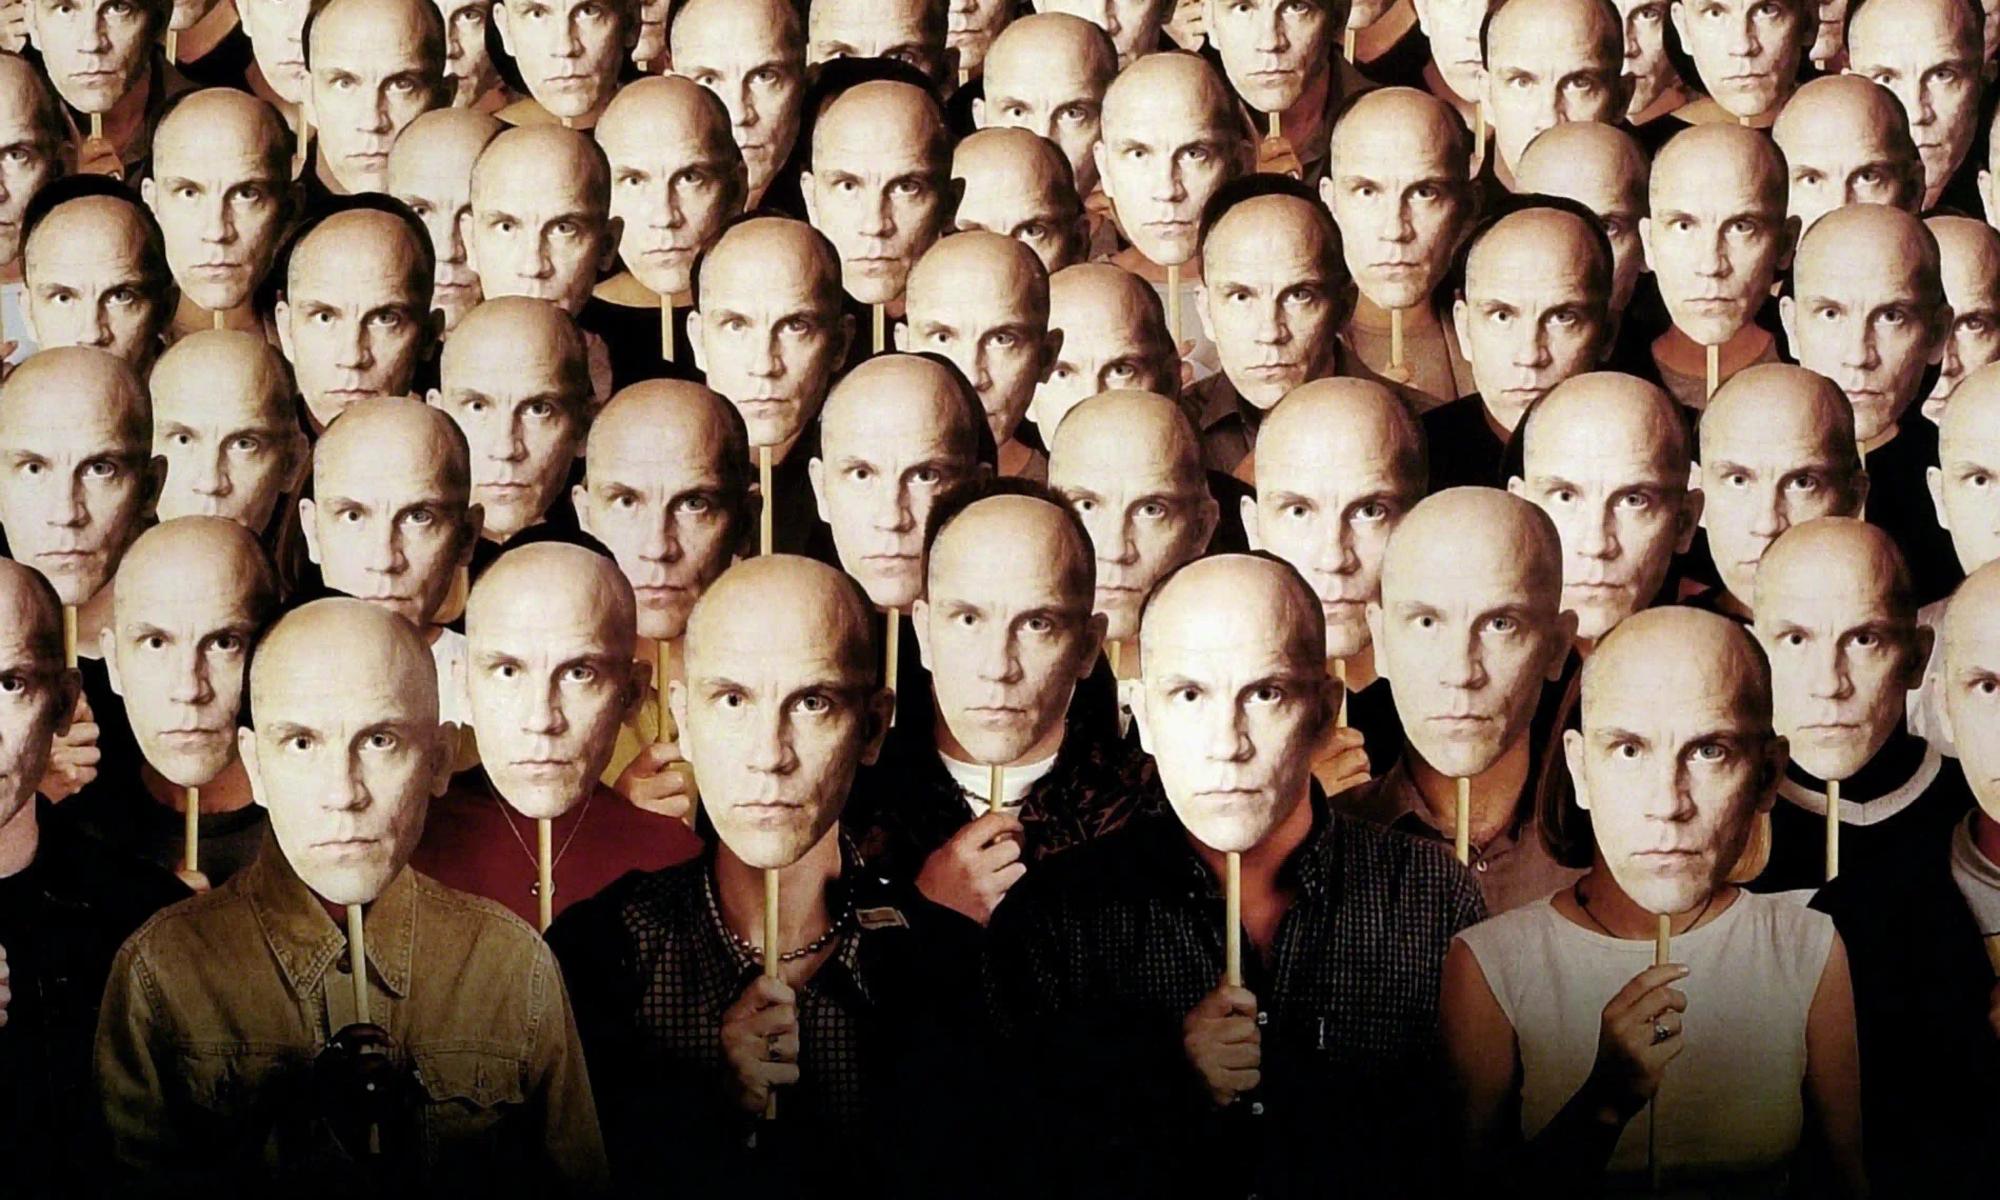 A crowd of figures, with different clothes and bodies, all hold up uniform masks with the face of John Malkovich staring seriously forward.